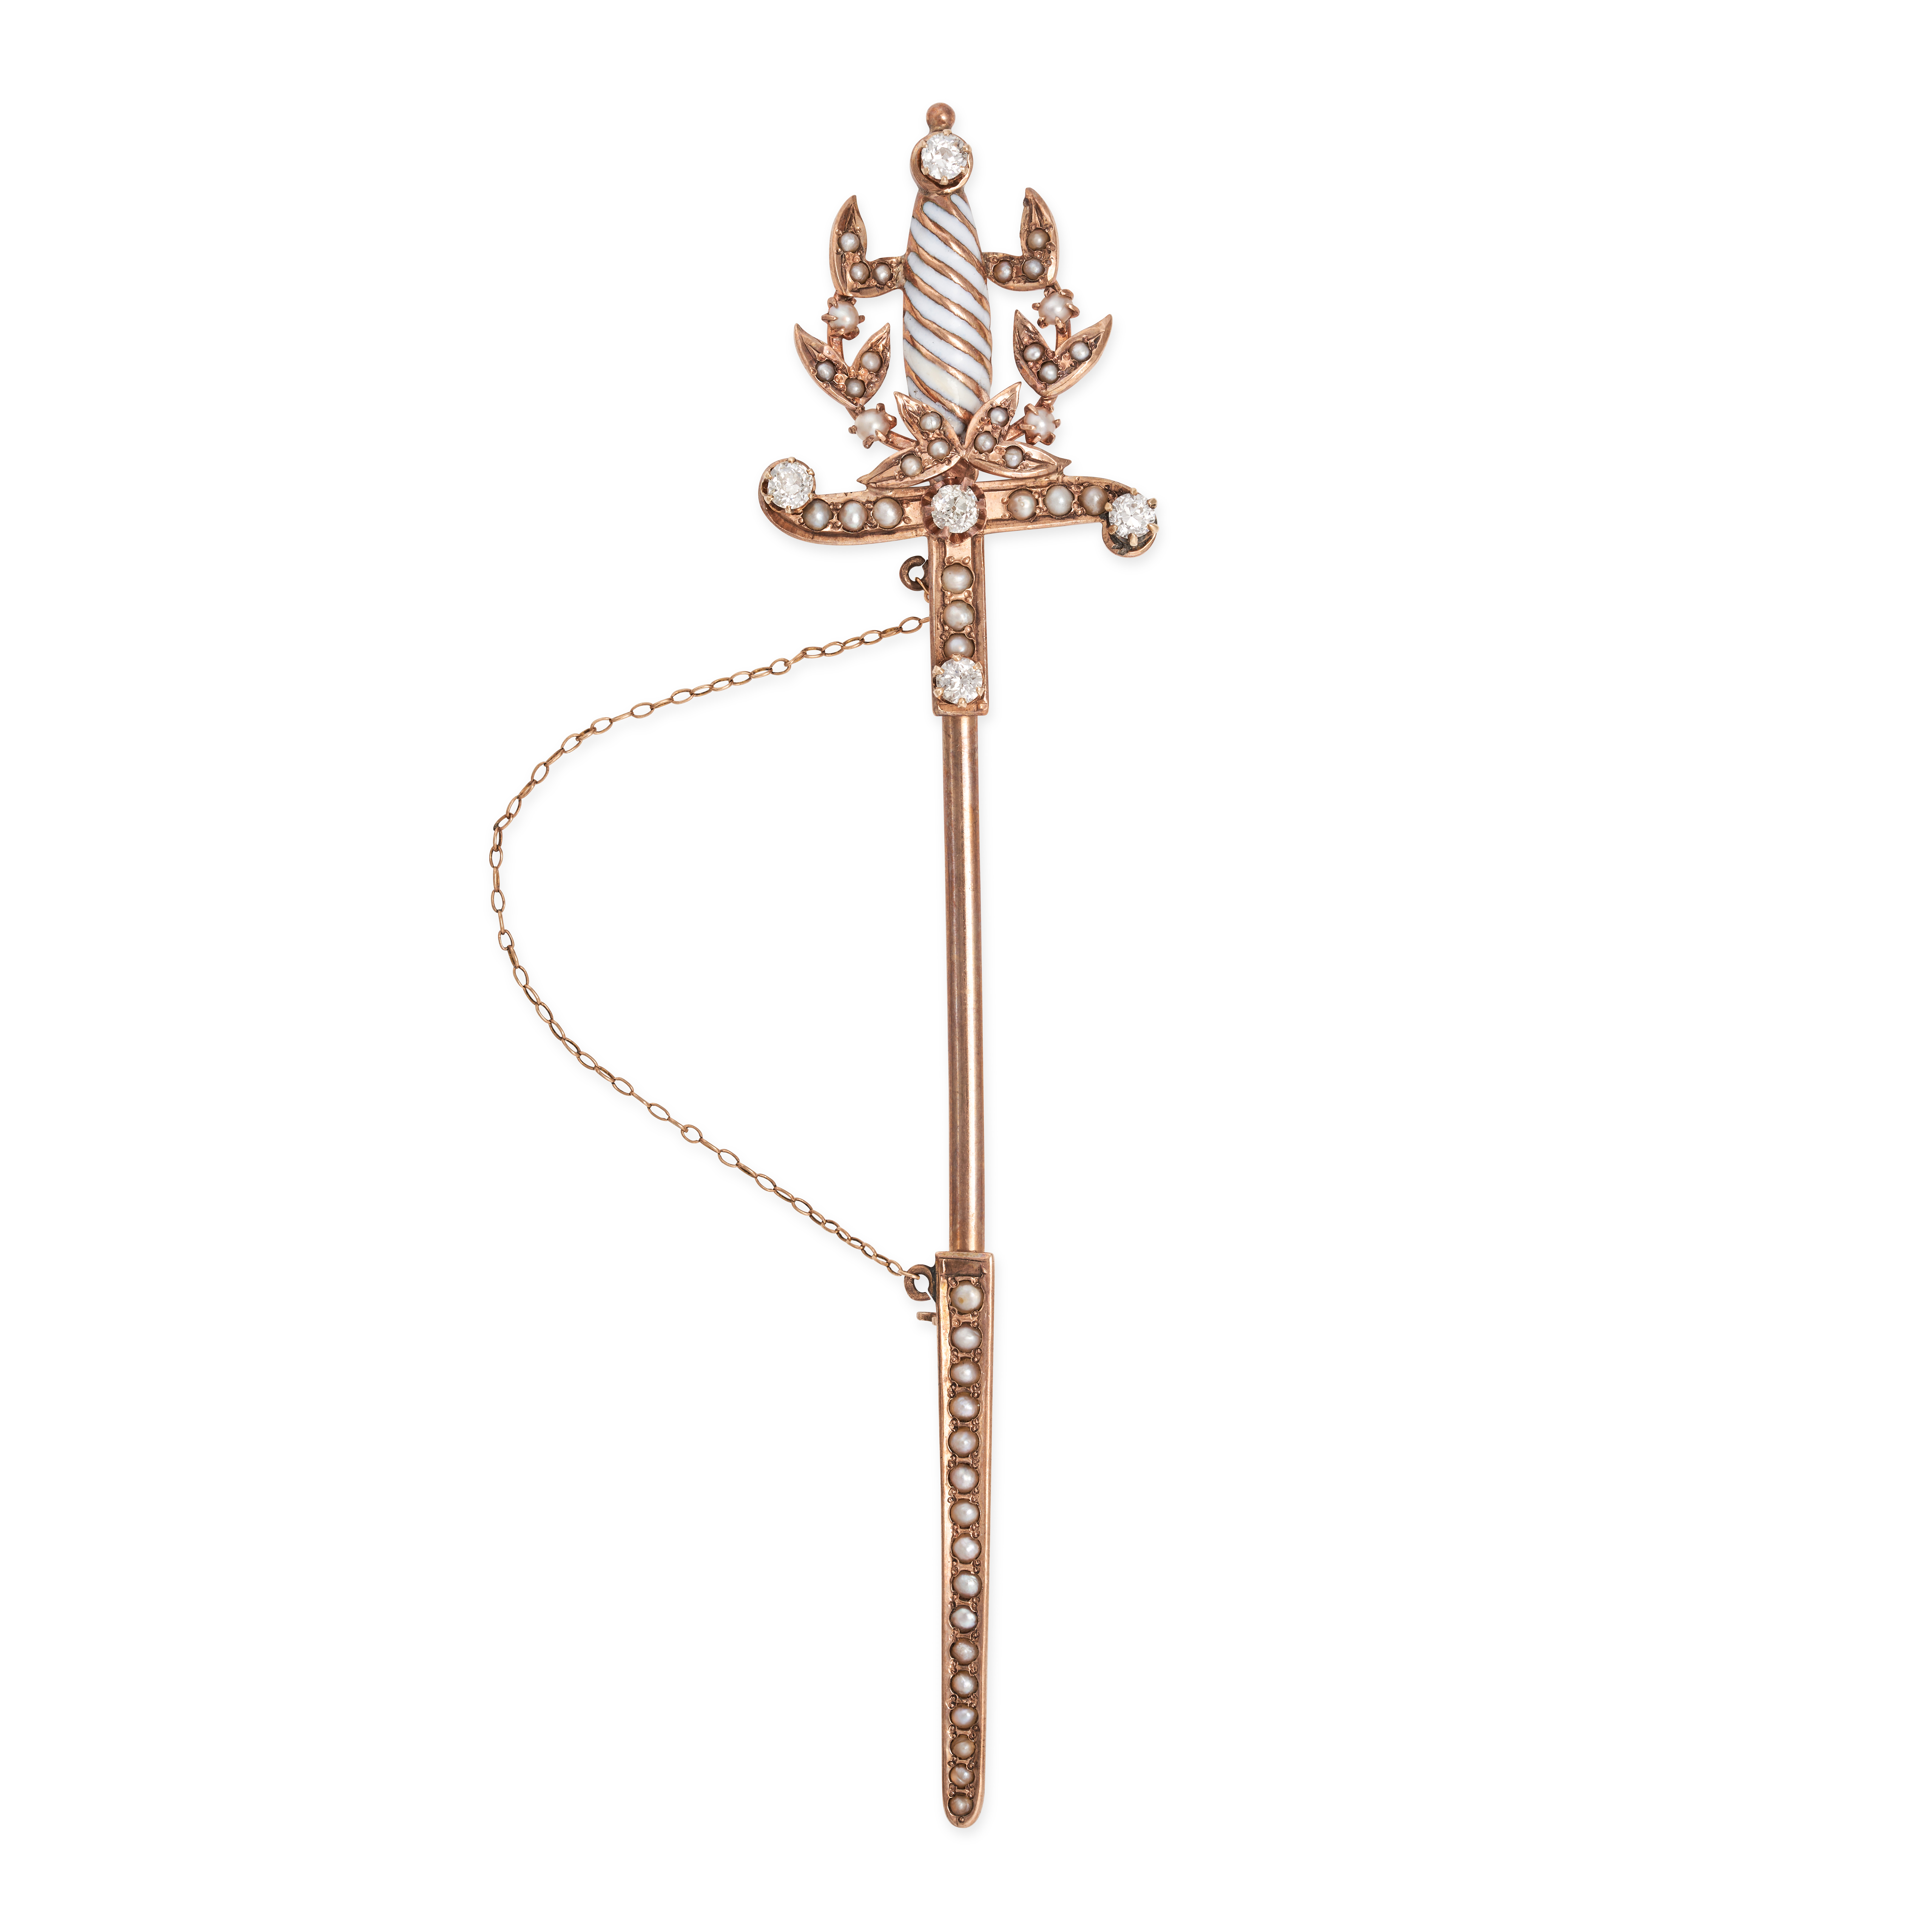 AN ANTIQUE DIAMOND, PEARL AND ENAMEL SWORD BROOCH in yellow gold, designed as a sword set through...